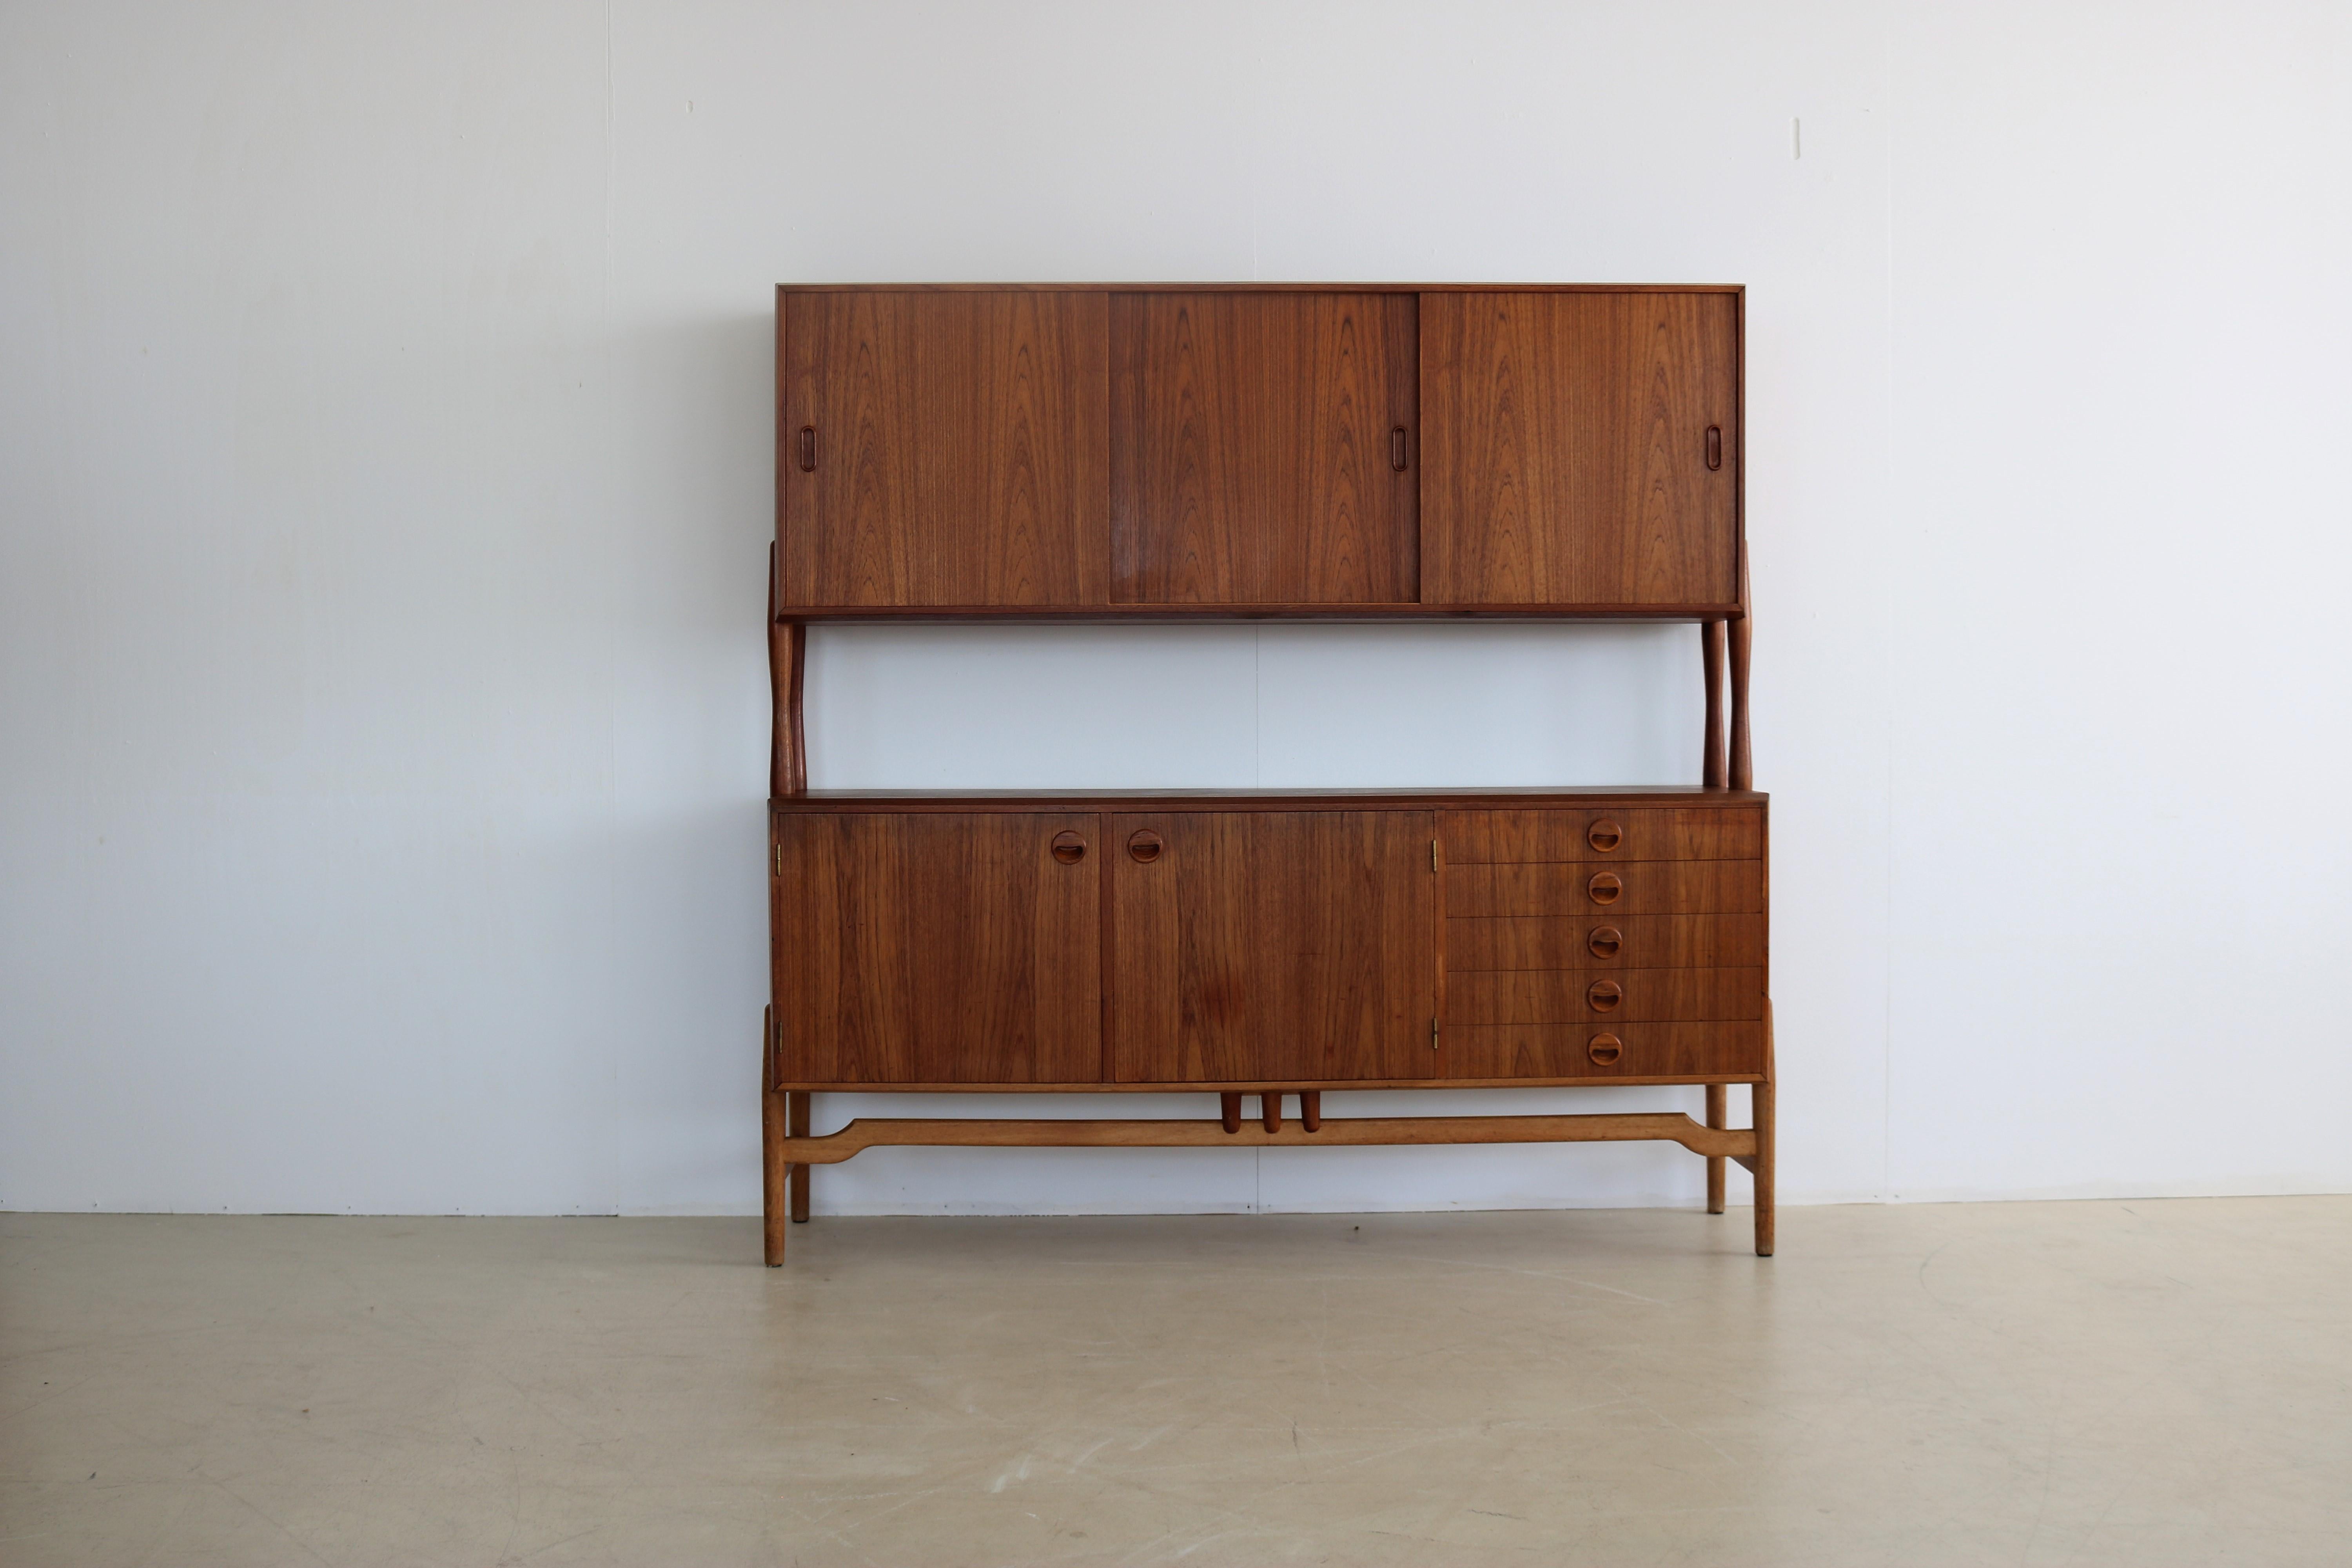 vintage high board wall unit Ahlstrom Osakeyhtio

period 60s
designs A. Ahlstrom Osakeyhtio Finland
conditions good light signs of use
Size 169 x 170 x 46 (hxwxd)

details teak; oak;
article number 1683.